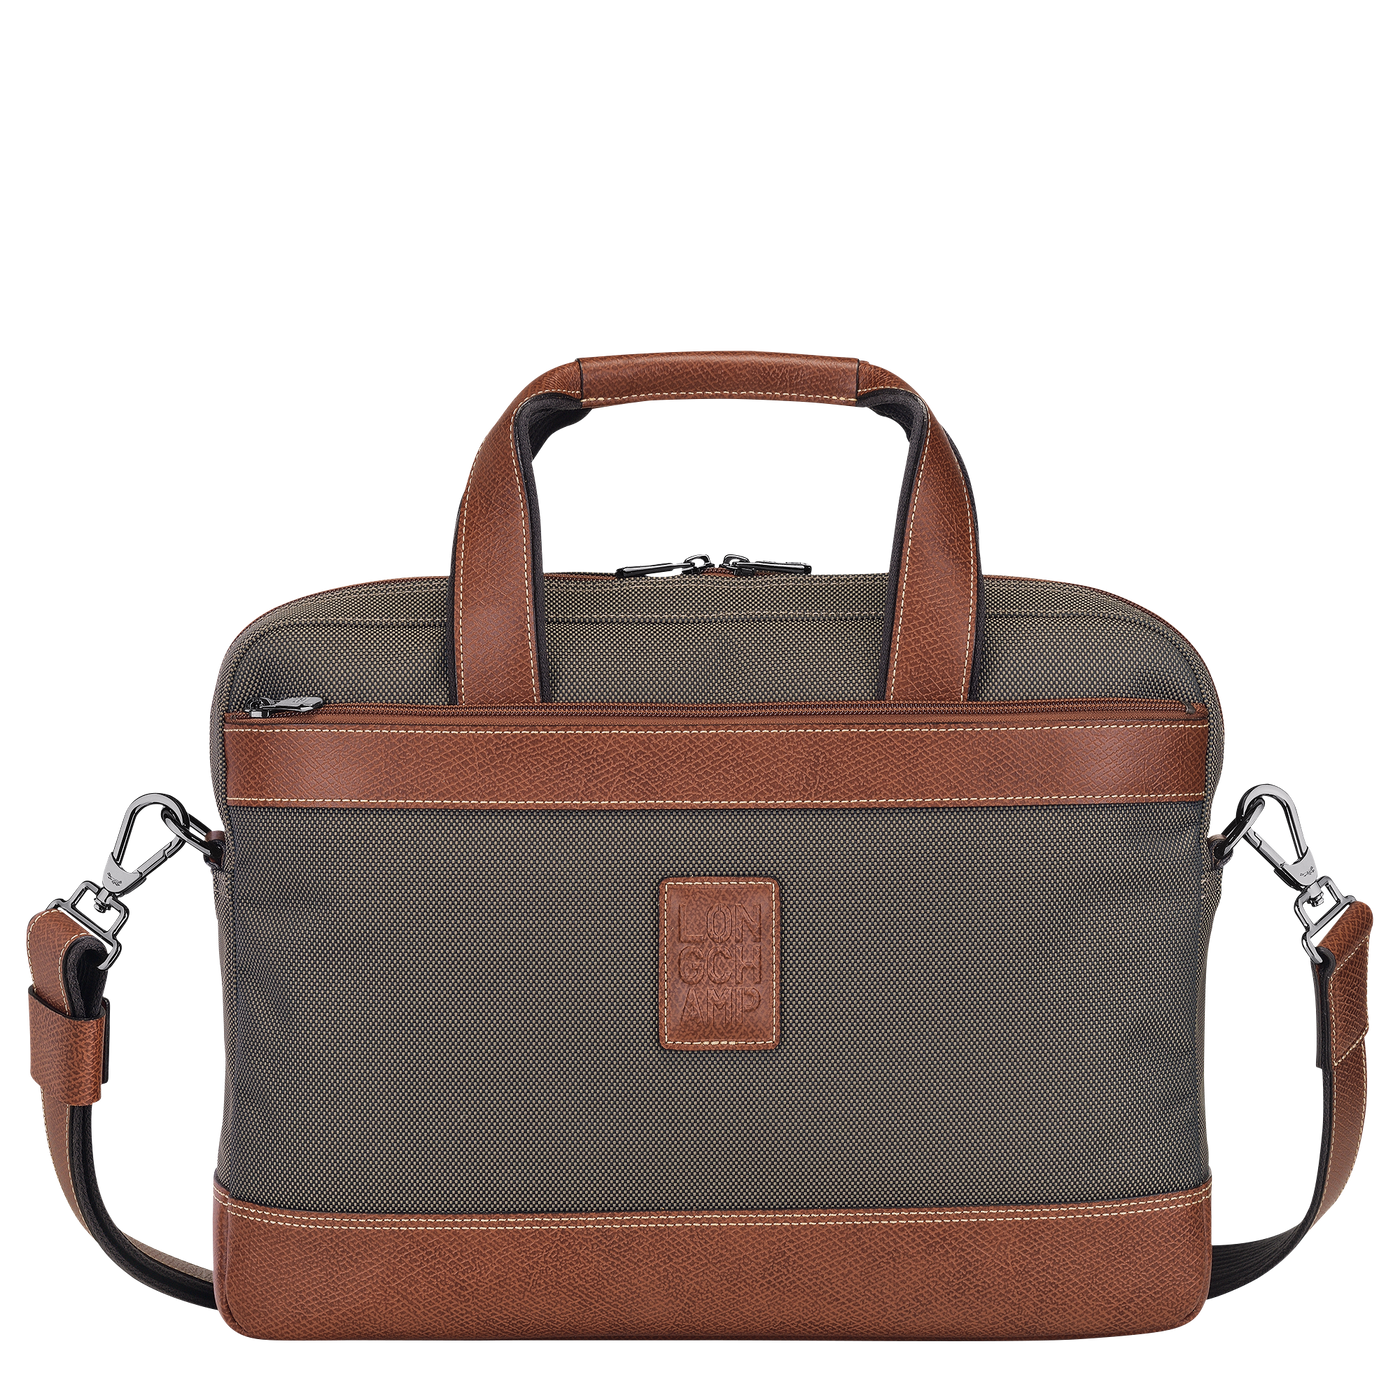 Shop The Latest Collection Of Longchamp Boxford Briefcase S - 1486080 In Lebanon